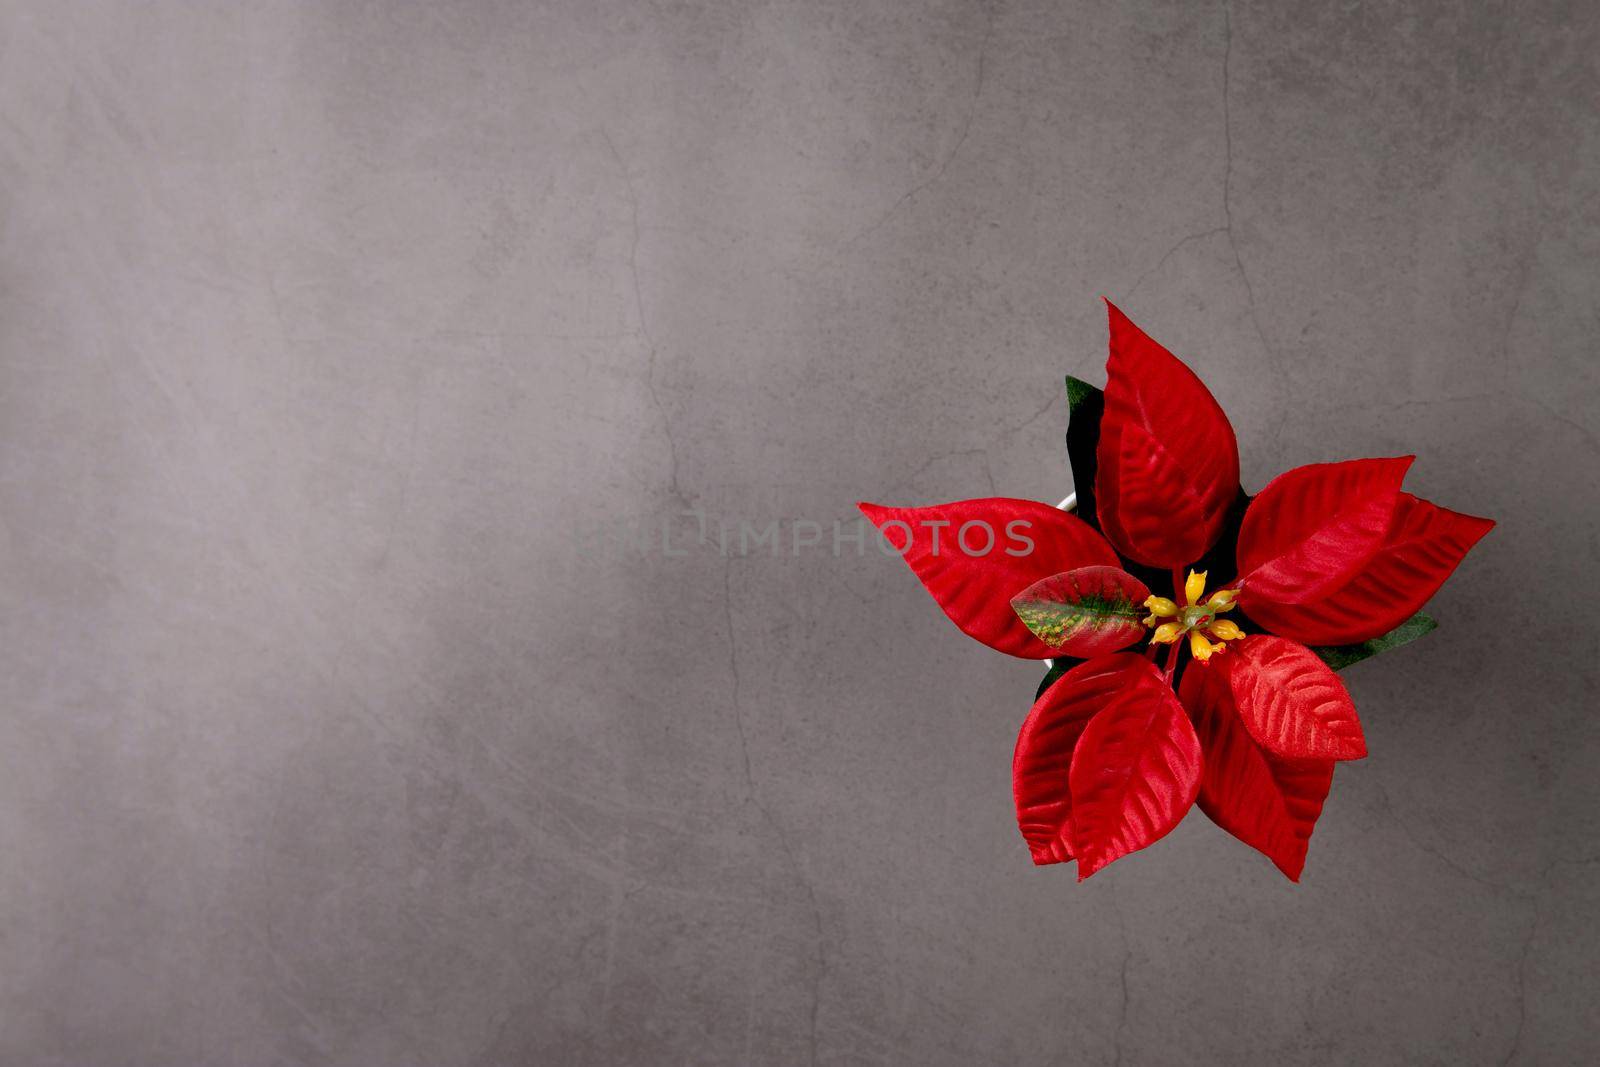 Poinsettia flower in Merry Christmas day for celebration on cement textured background, xmas holiday with plant or floral is symbol, nobody, no people, elements of flora and bloom, top view.